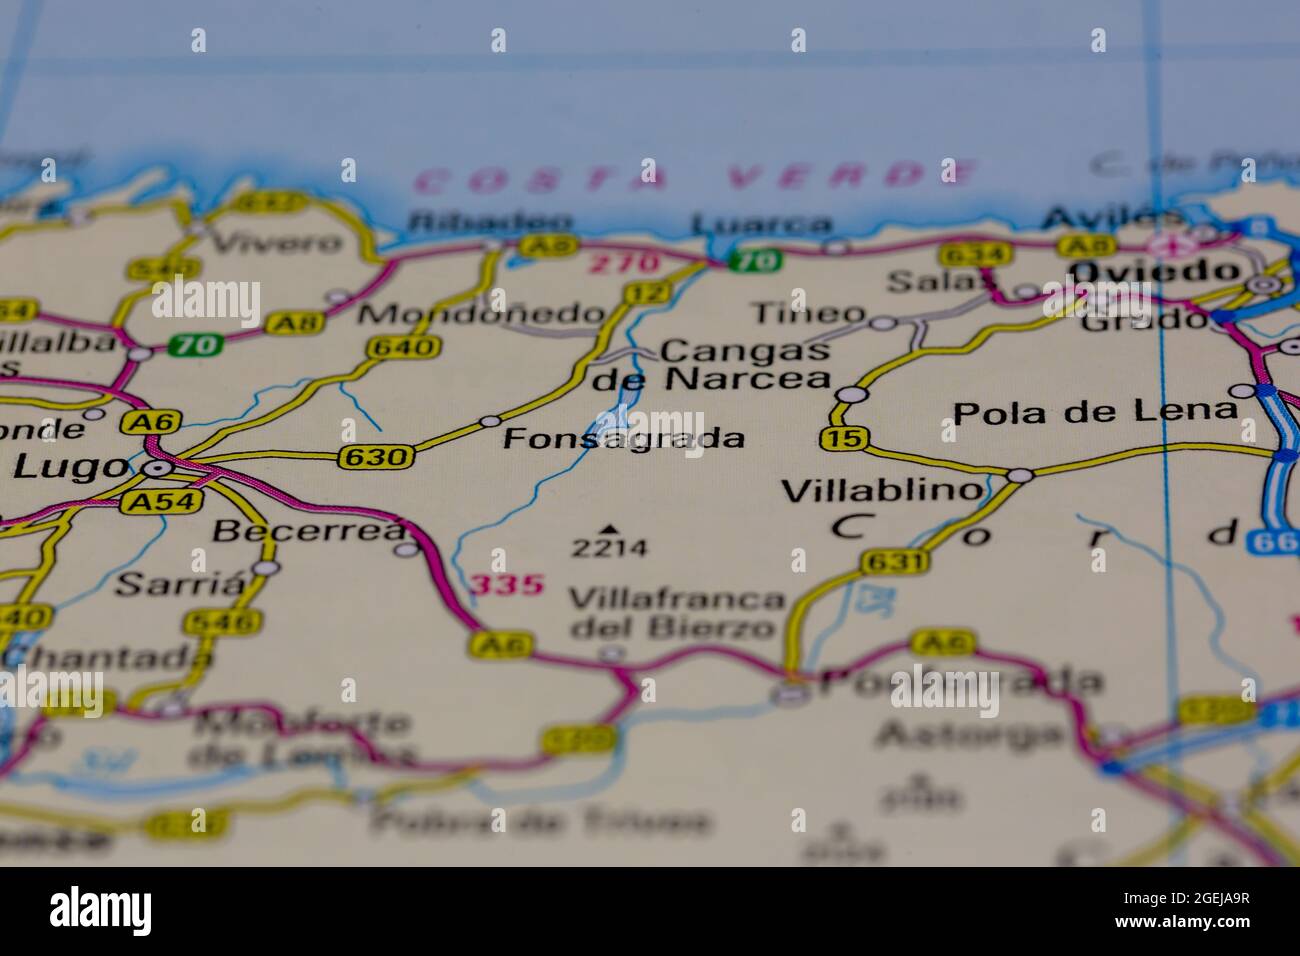 Fonsagrada Spain shown on a road map or Geography map Stock Photo